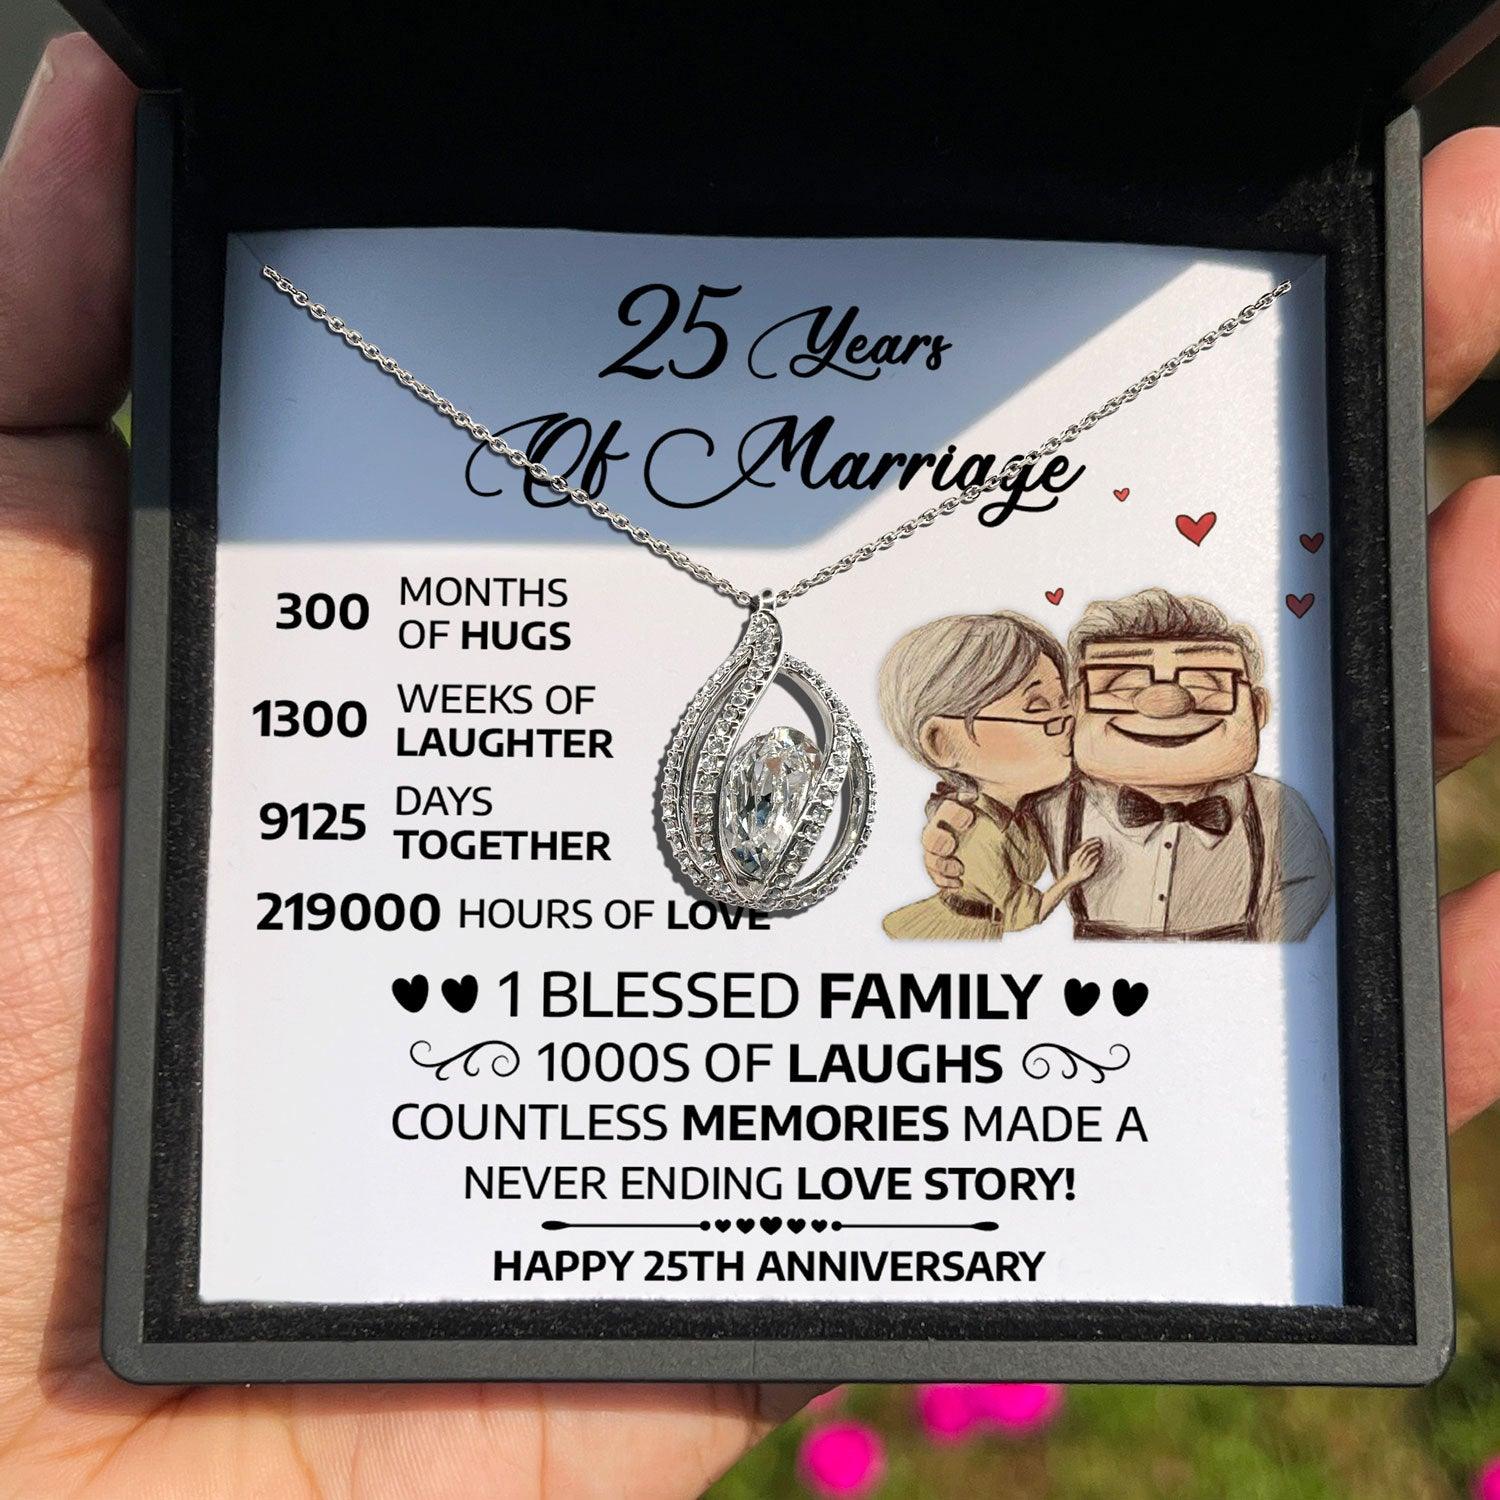 Anniversary Gifts for Her - 300 Months Of Hugs,1300 Weeks Of Laughter, Happy 25th Anniversary - Orbital Birdcage Necklace - TRYNDI